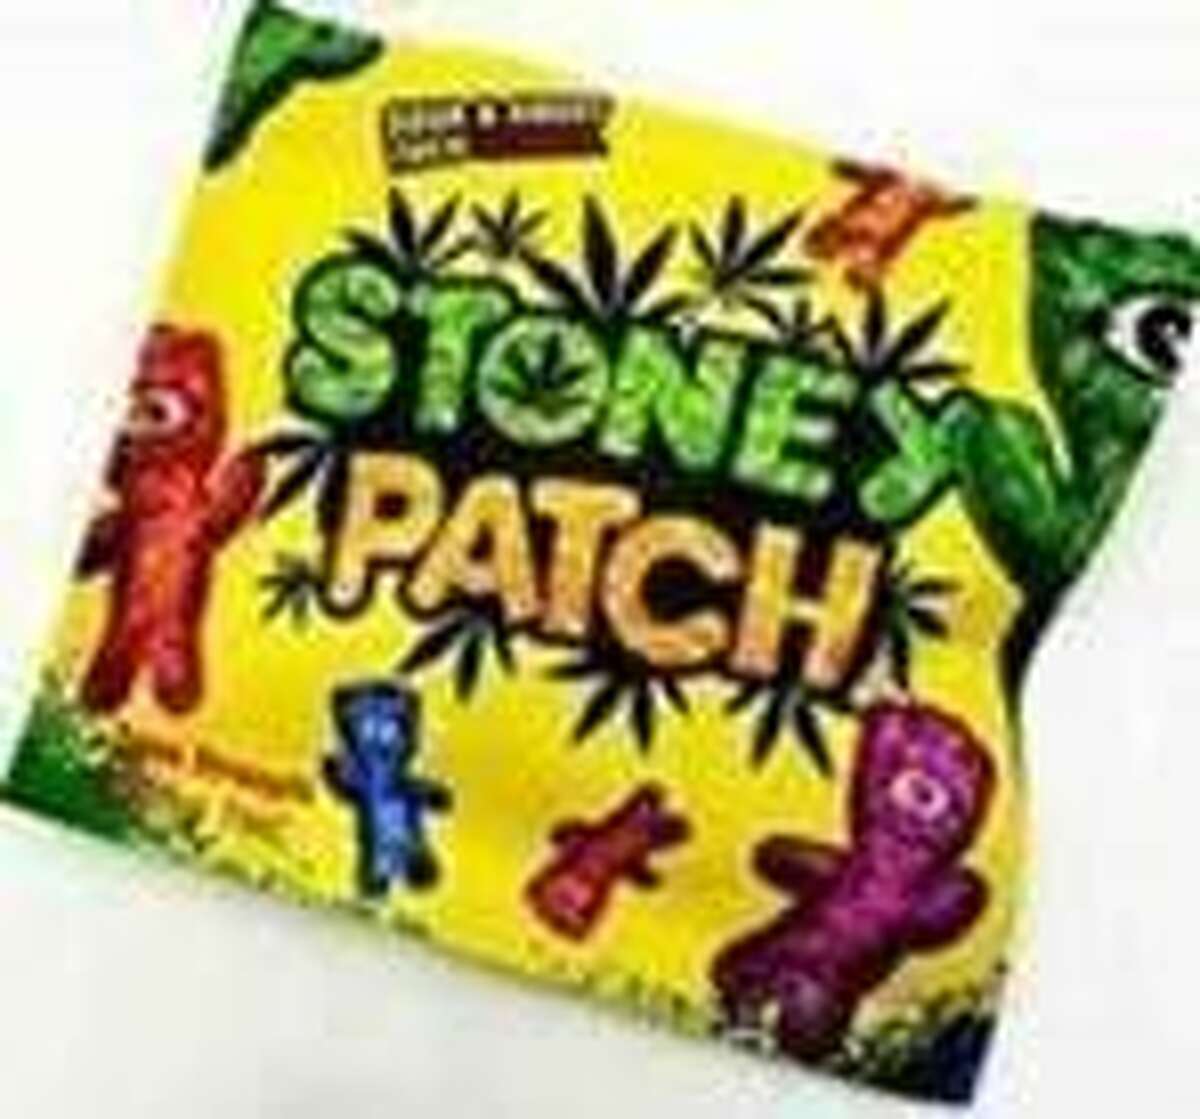 sour-patch-or-stoney-patch-parents-warned-about-edible-pot-packaging